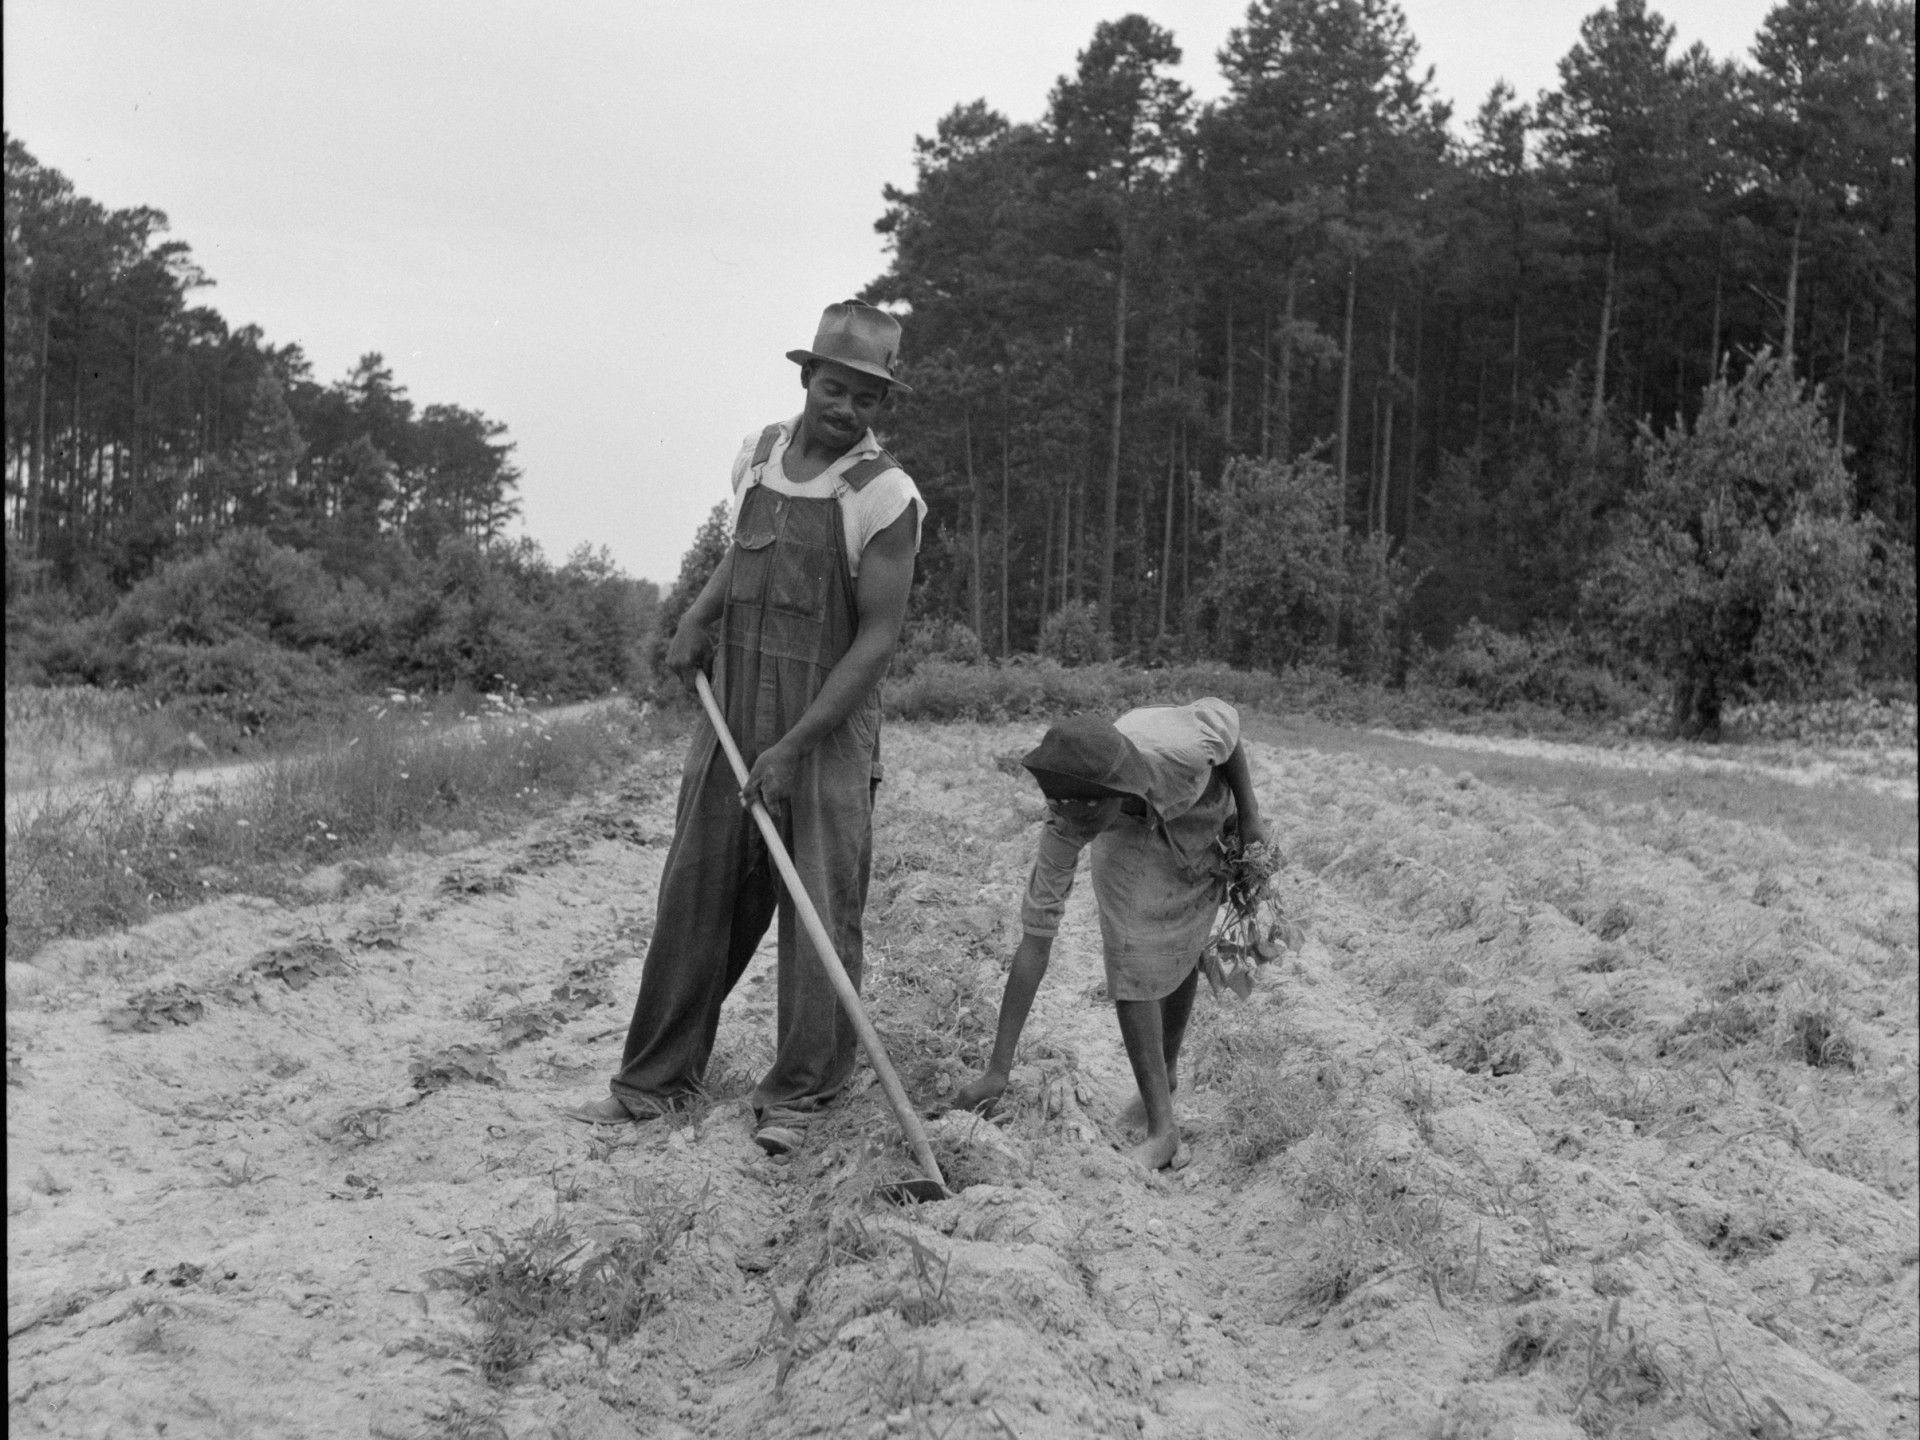 A sharecropper plants sweet potatoes with his 13-year-old daughter near Olive Hill, N.C., July 1939. "Her father hopes to send her to school," Lange noted